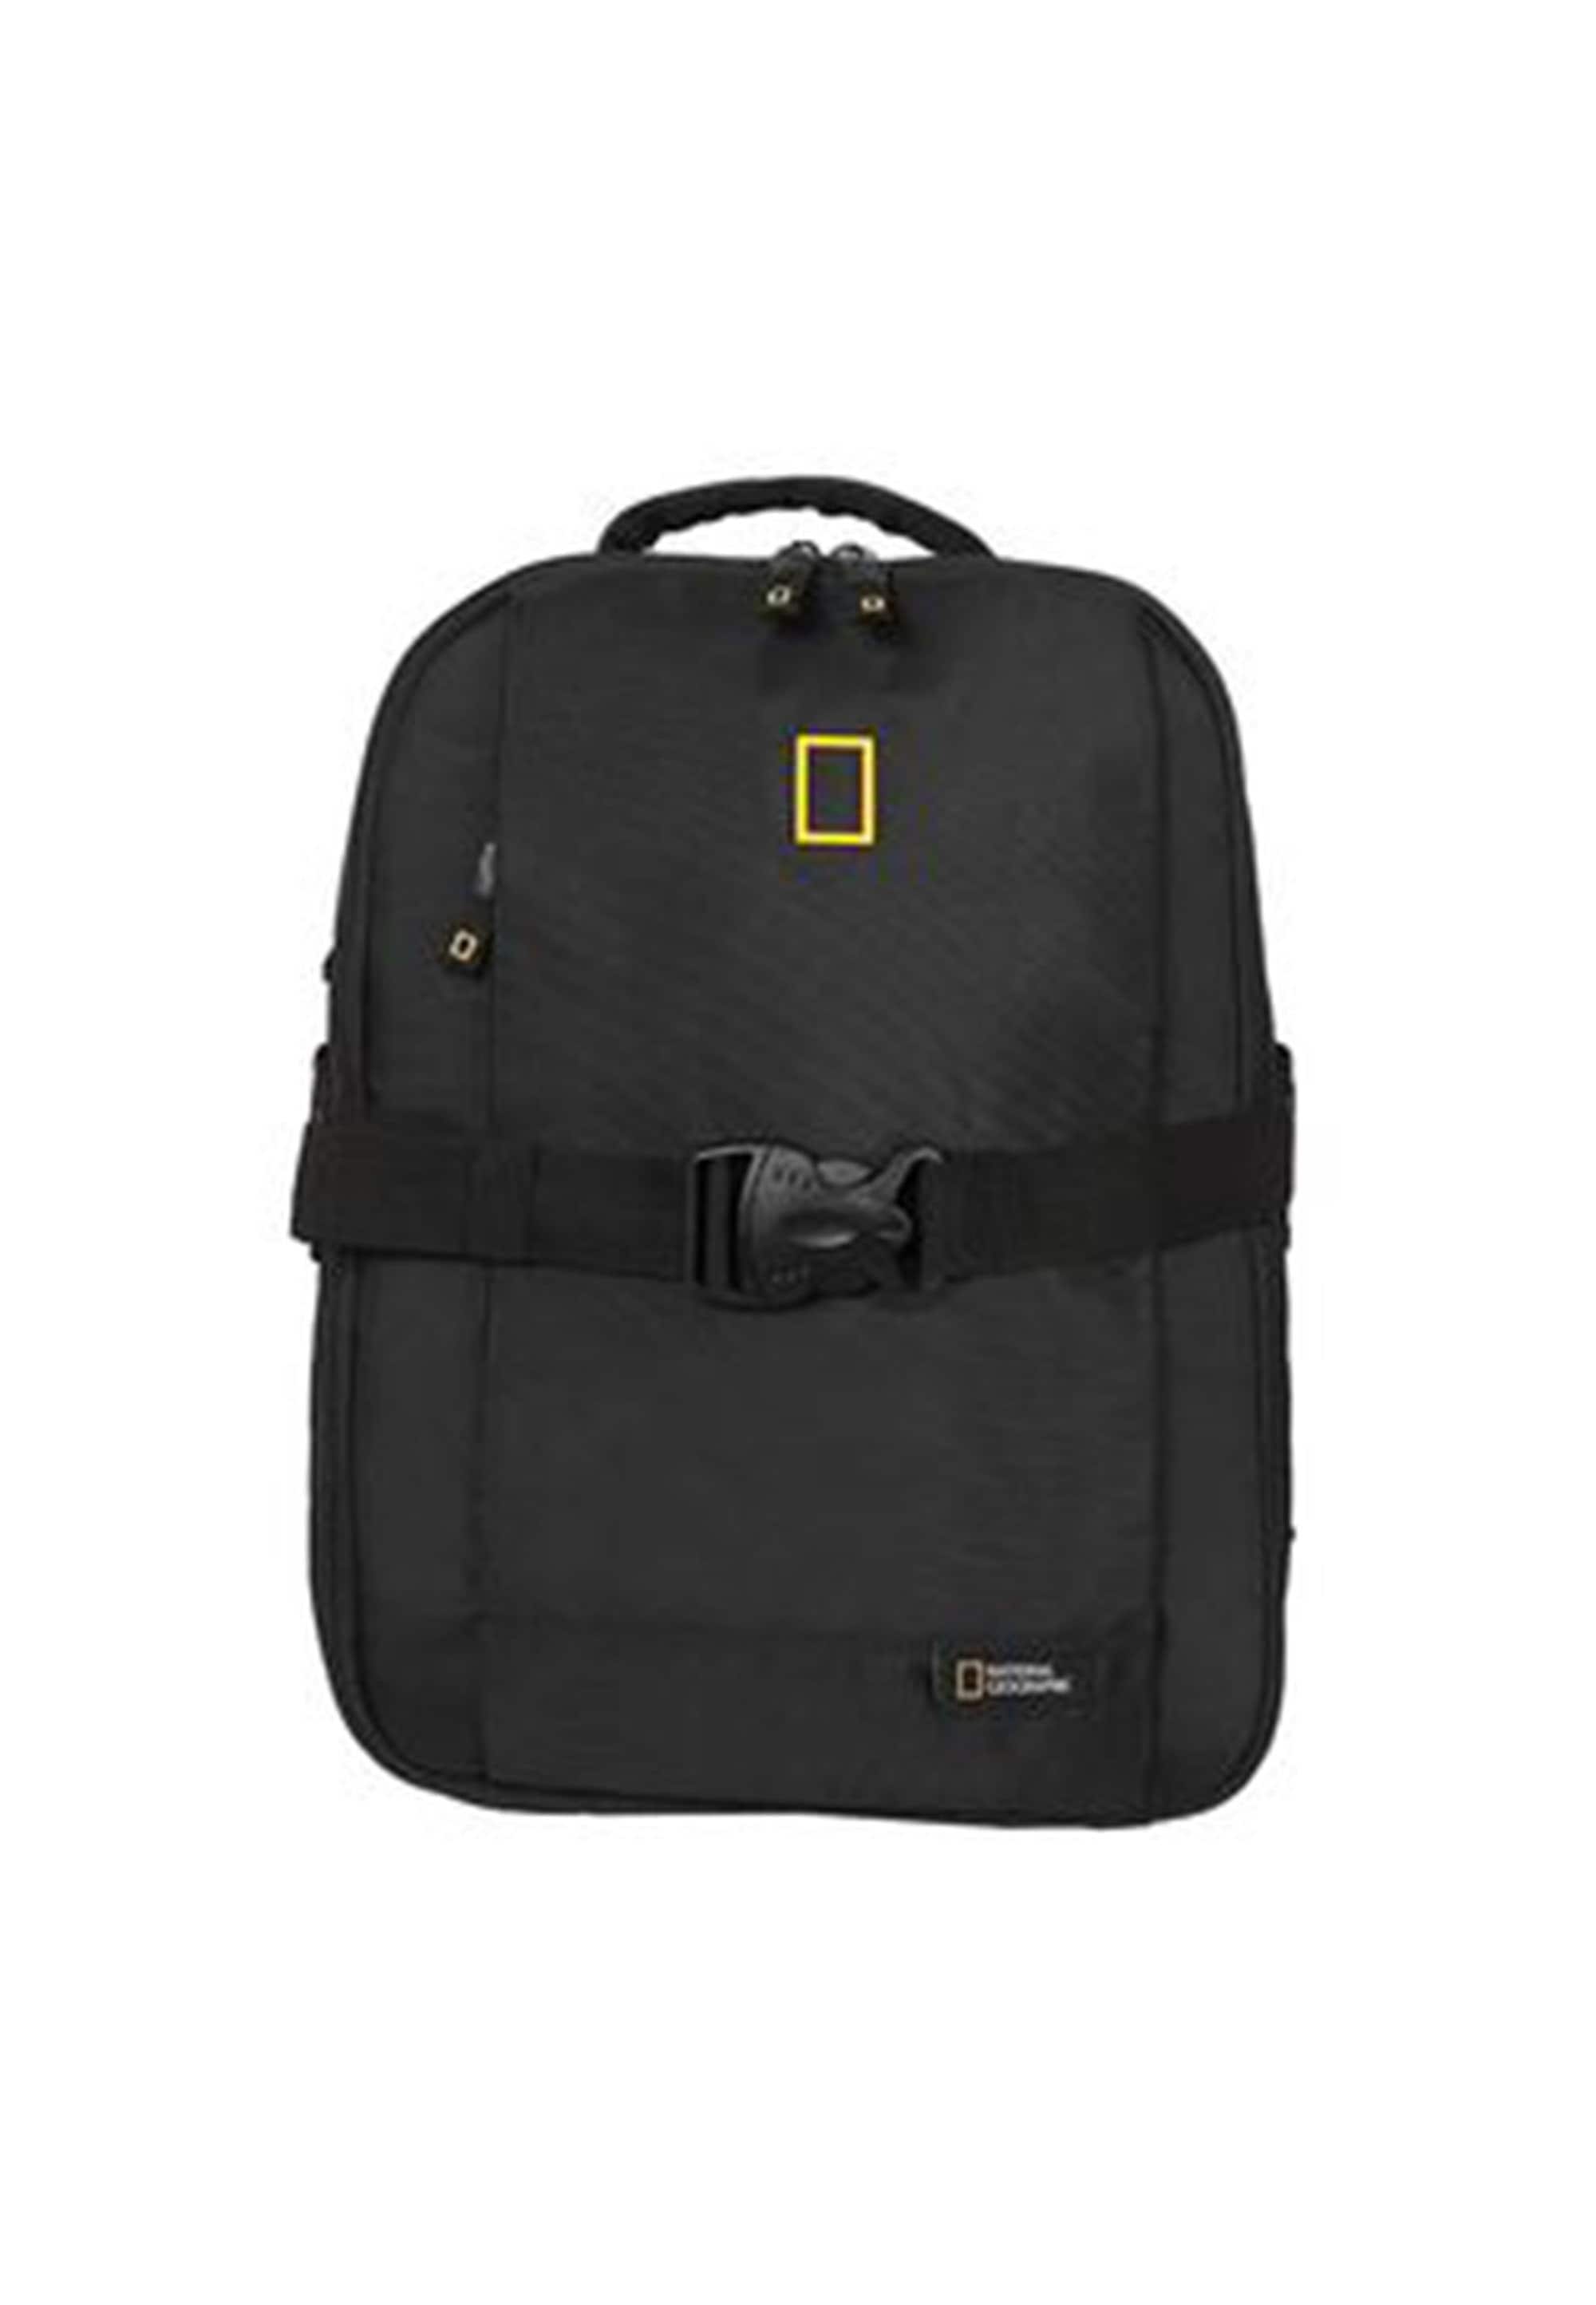 NATIONAL GEOGRAPHIC Cityrucksack "Recovery", aus robustem Polyester-Material mit funktionellem Design